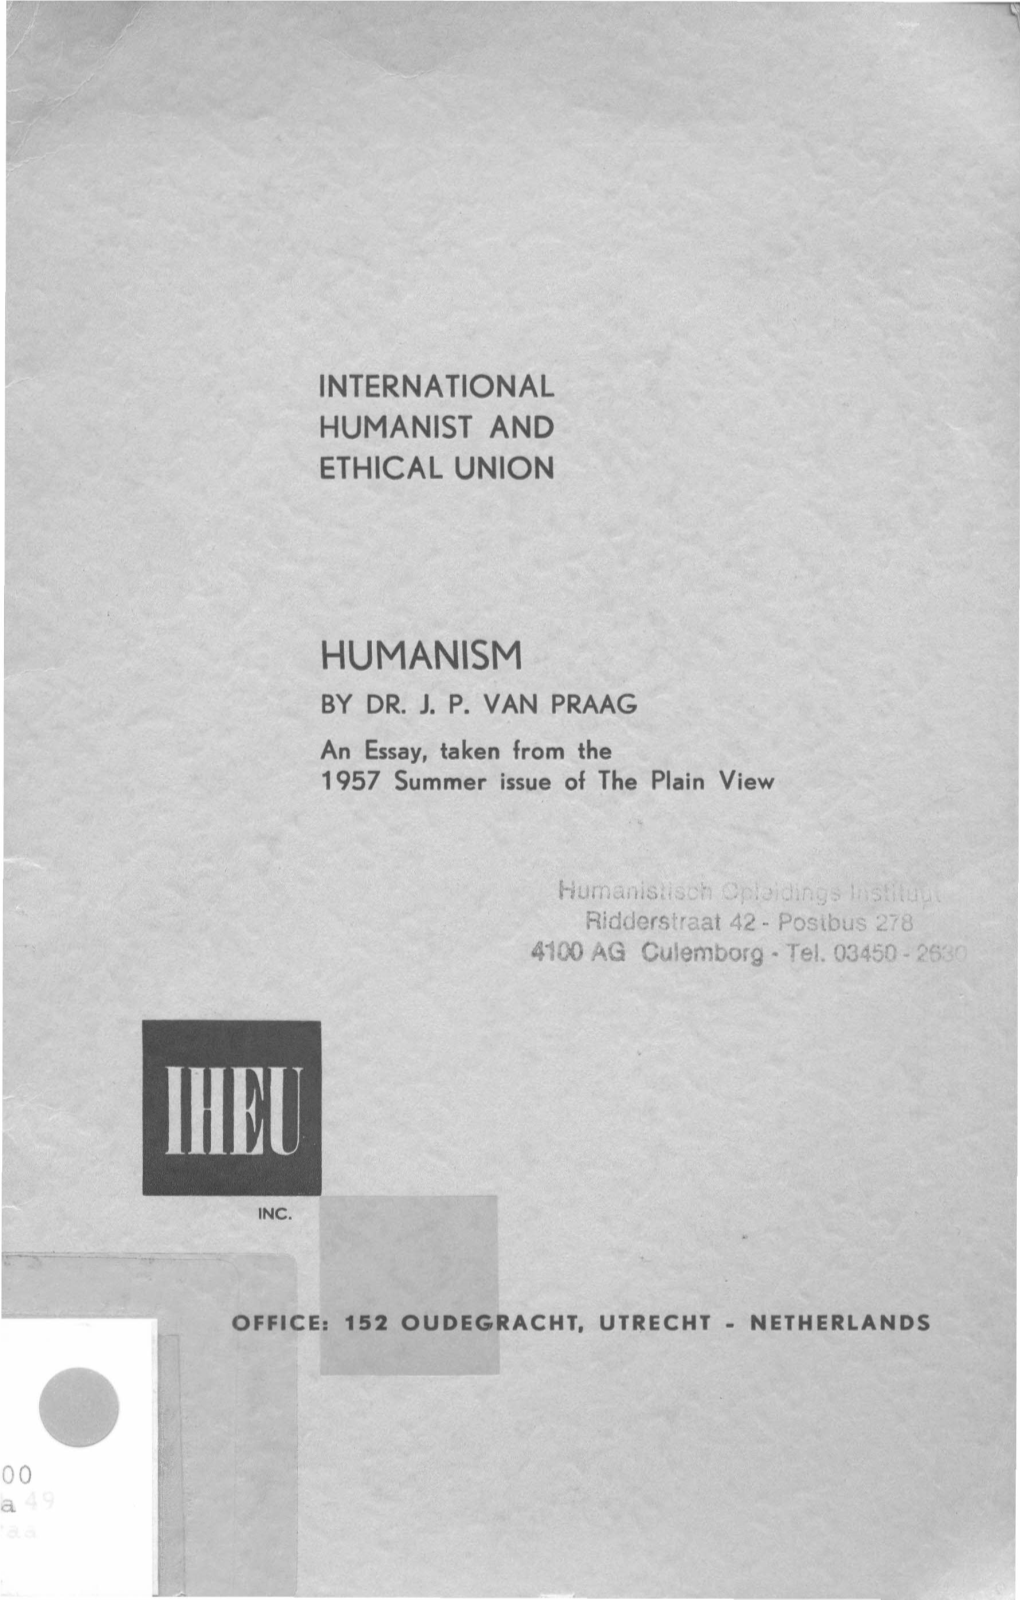 Humanism by Dr